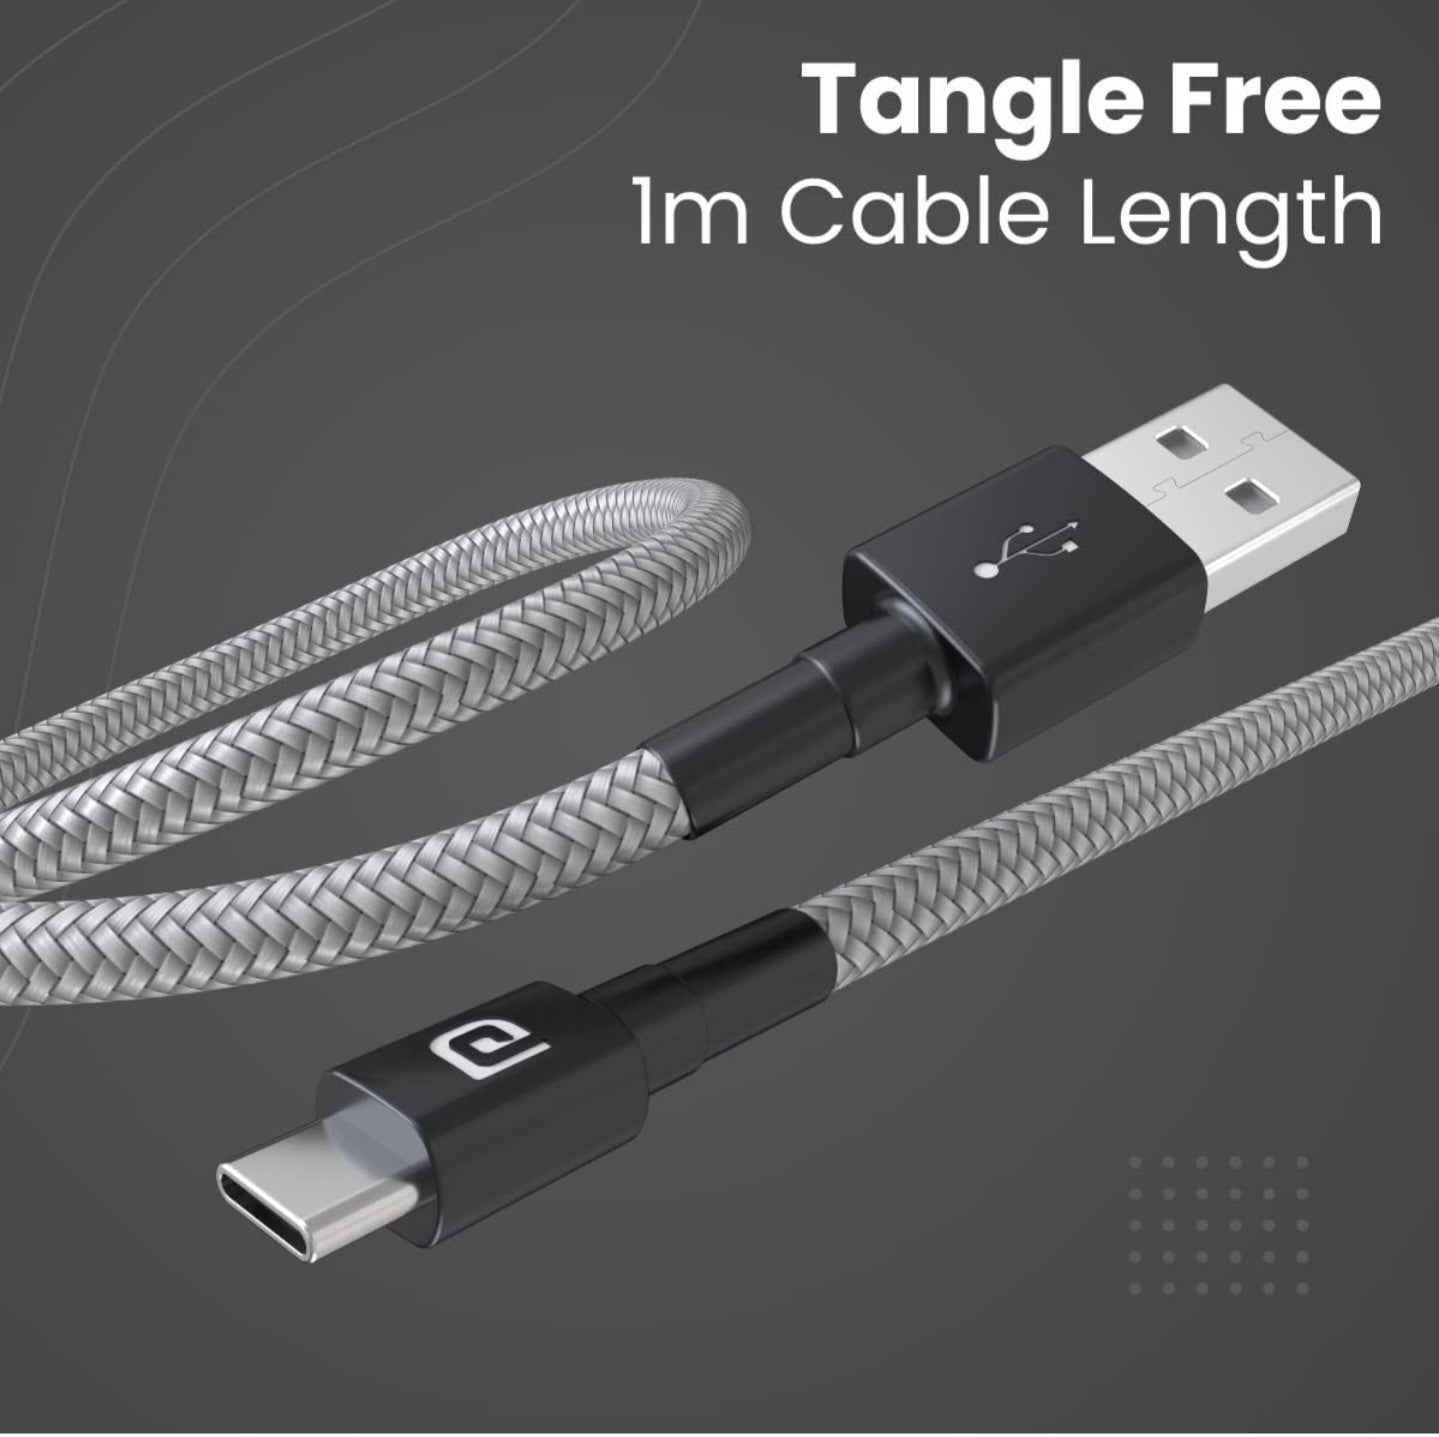 Portronics Konnect B Type C Cable with 3.0A Output, Nylon Braided, Fast Data Sync, Tangle Resistant, 1M Length(Grey)